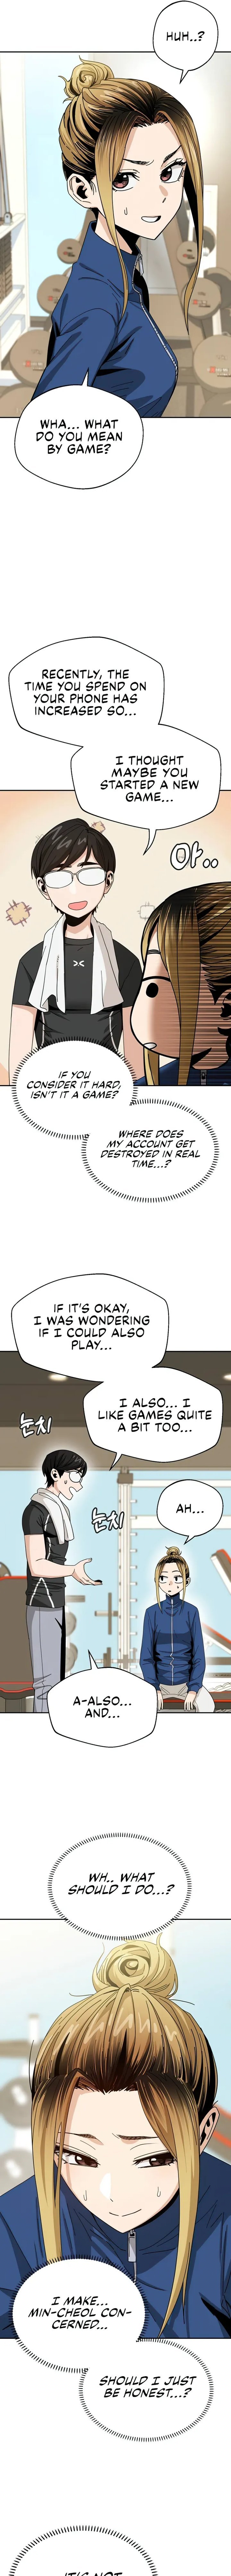 Match Made In Heaven By Chance Chapter 38 Page 11